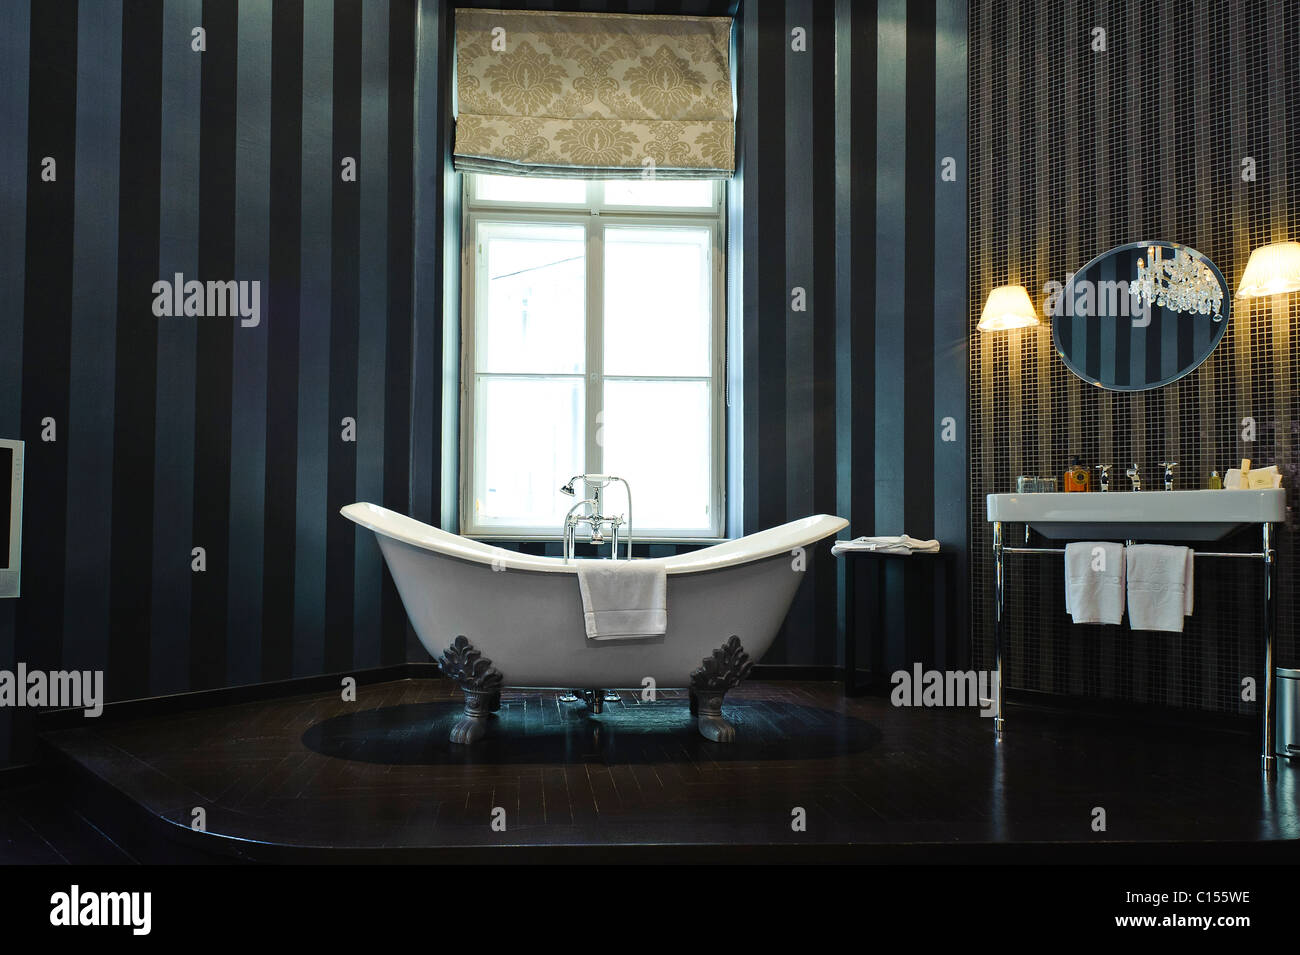 One of the various design rooms at this Vienna Boutique Hotel. Hotel Altstadt Stock Photo